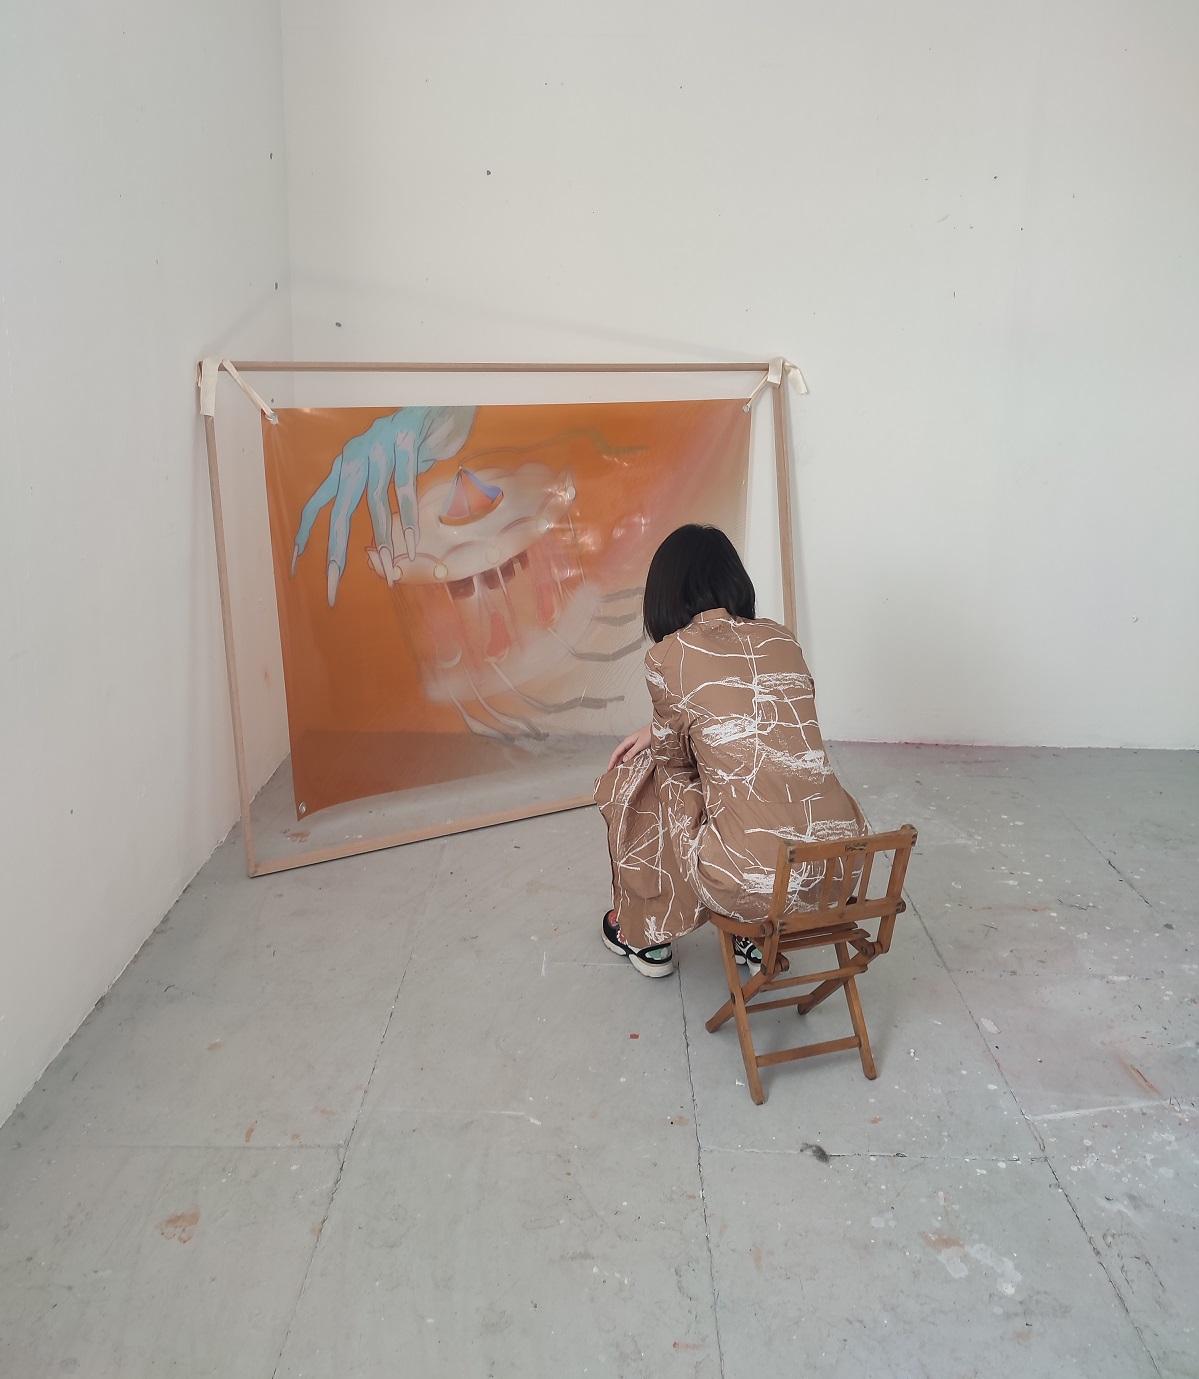 A picture of an installation where someone sitting in a small wooden chair is facing a colourful acetate print hanging from an oak frame via ribbons, in the corner of a room.